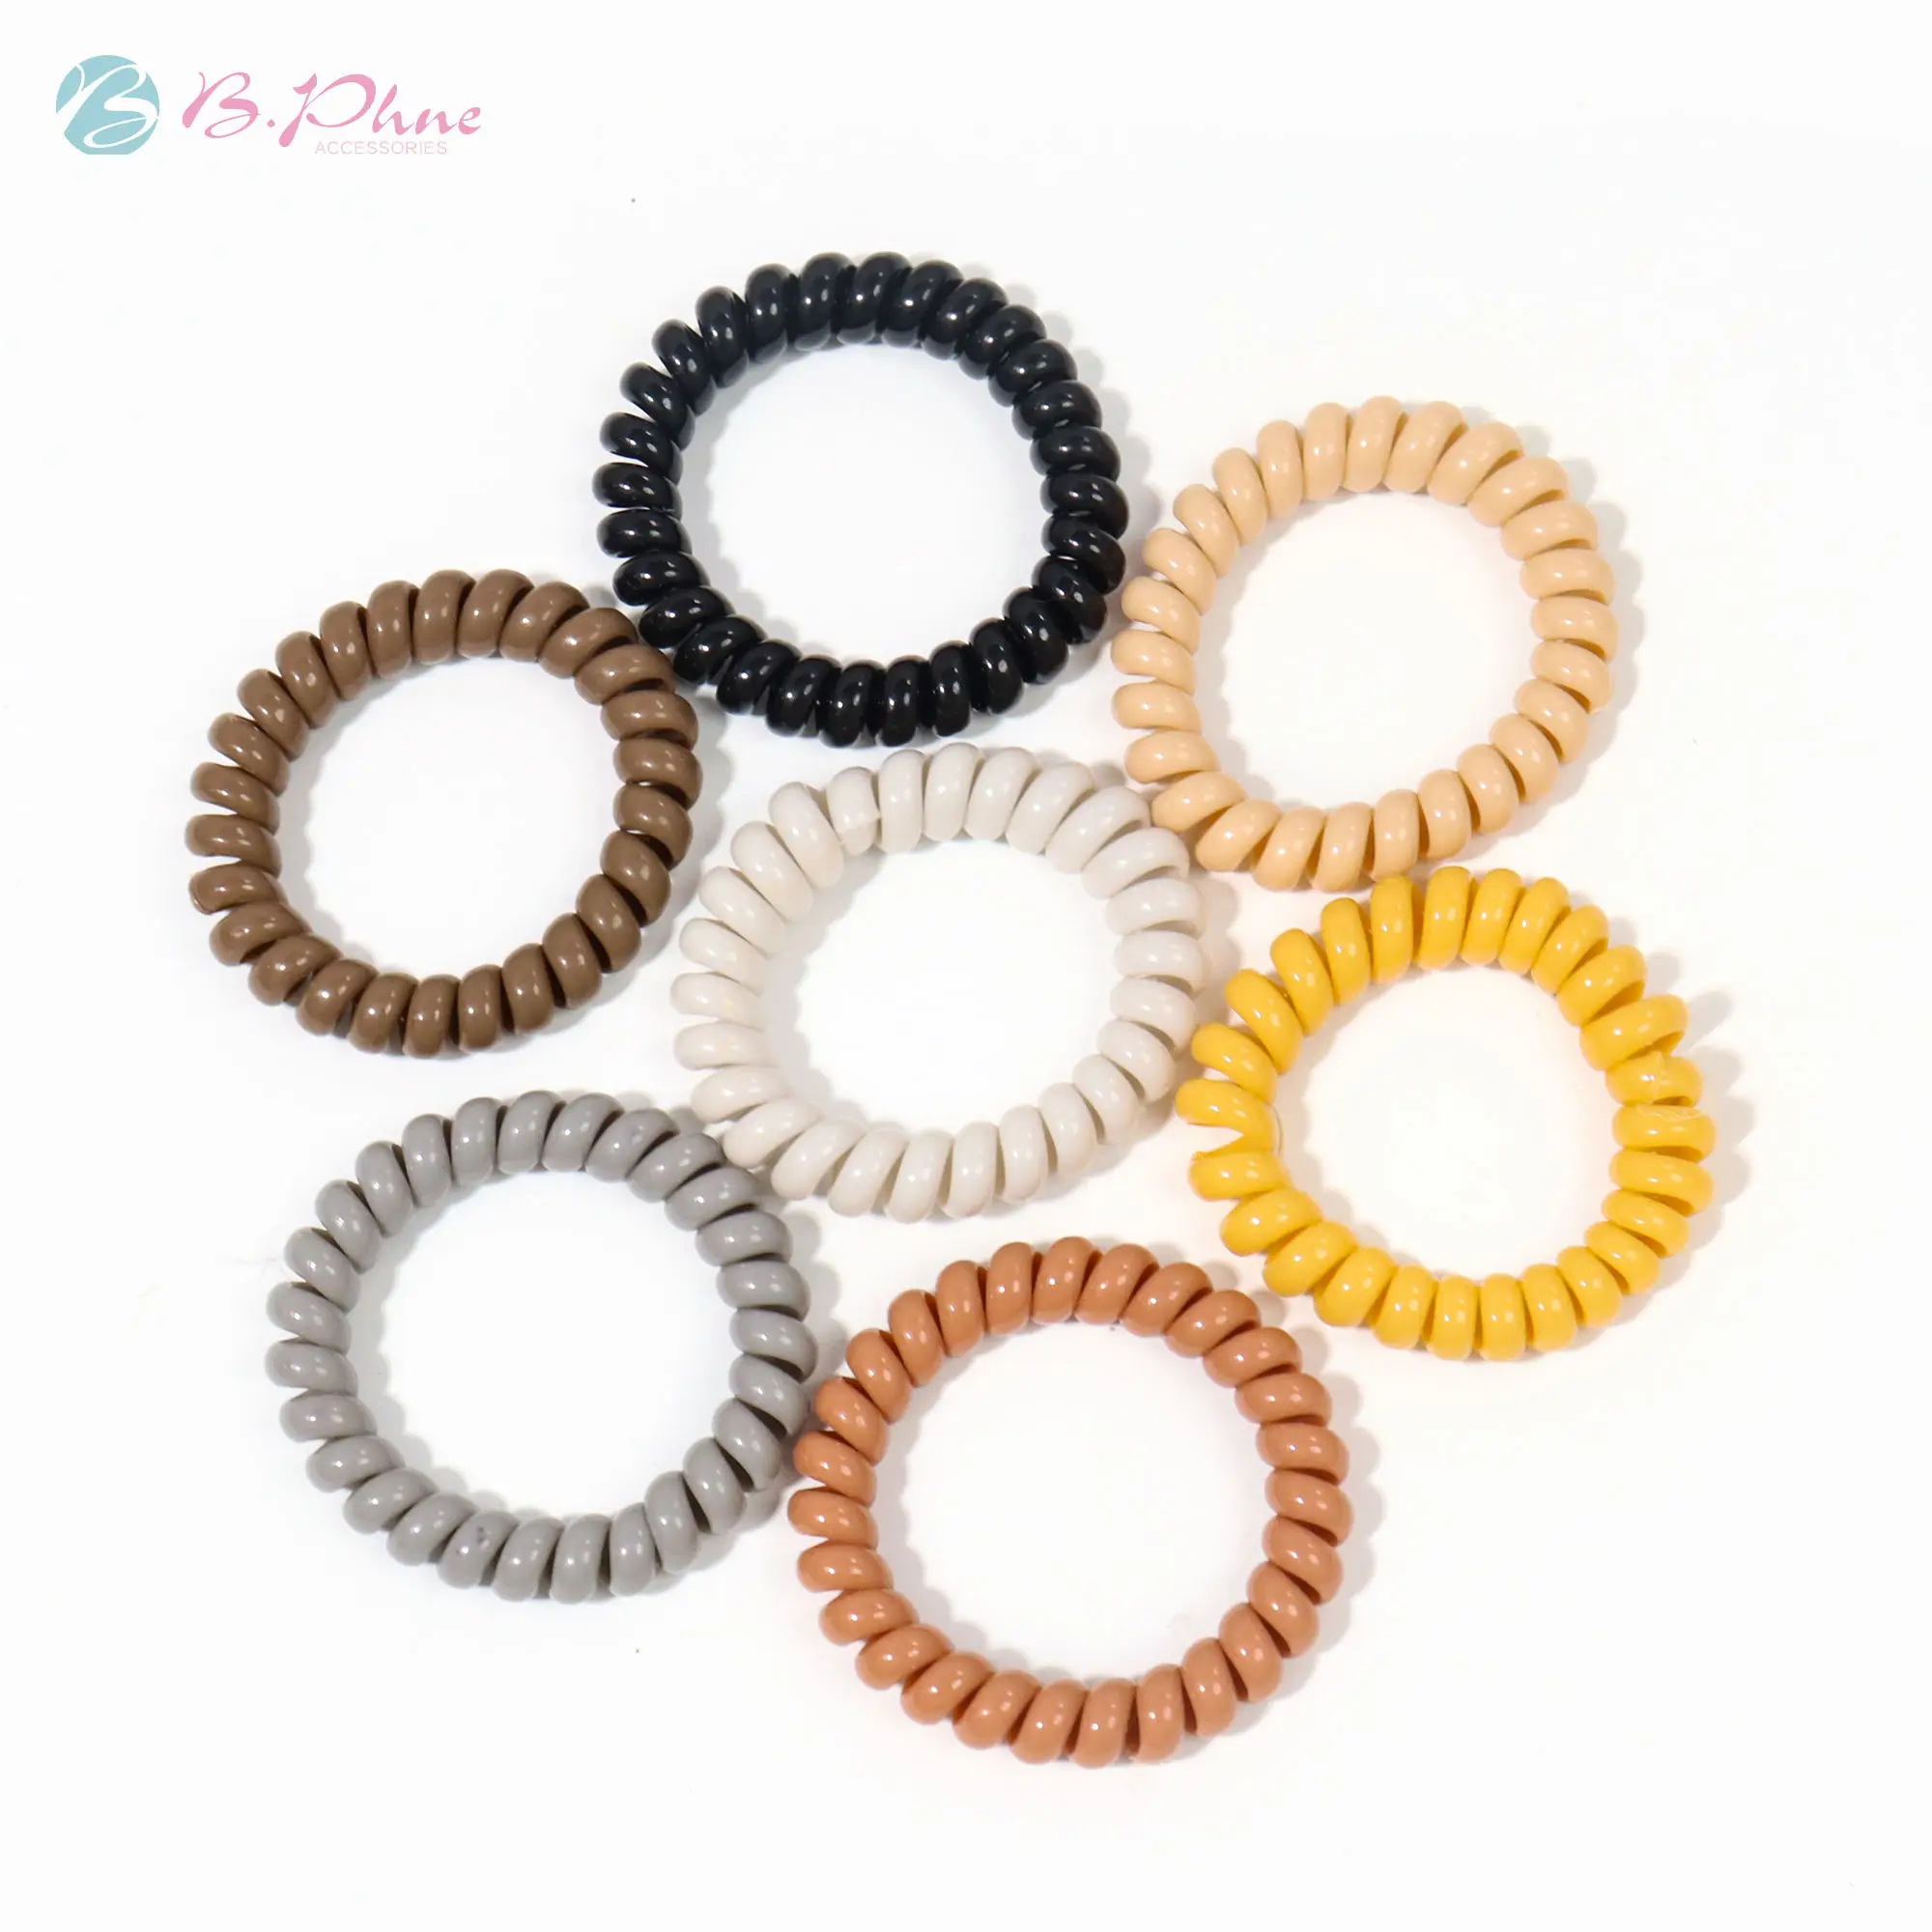 

B.PHNE New design spiral hair ring women solid color hair ties telephone wire elastic hair rubber bands